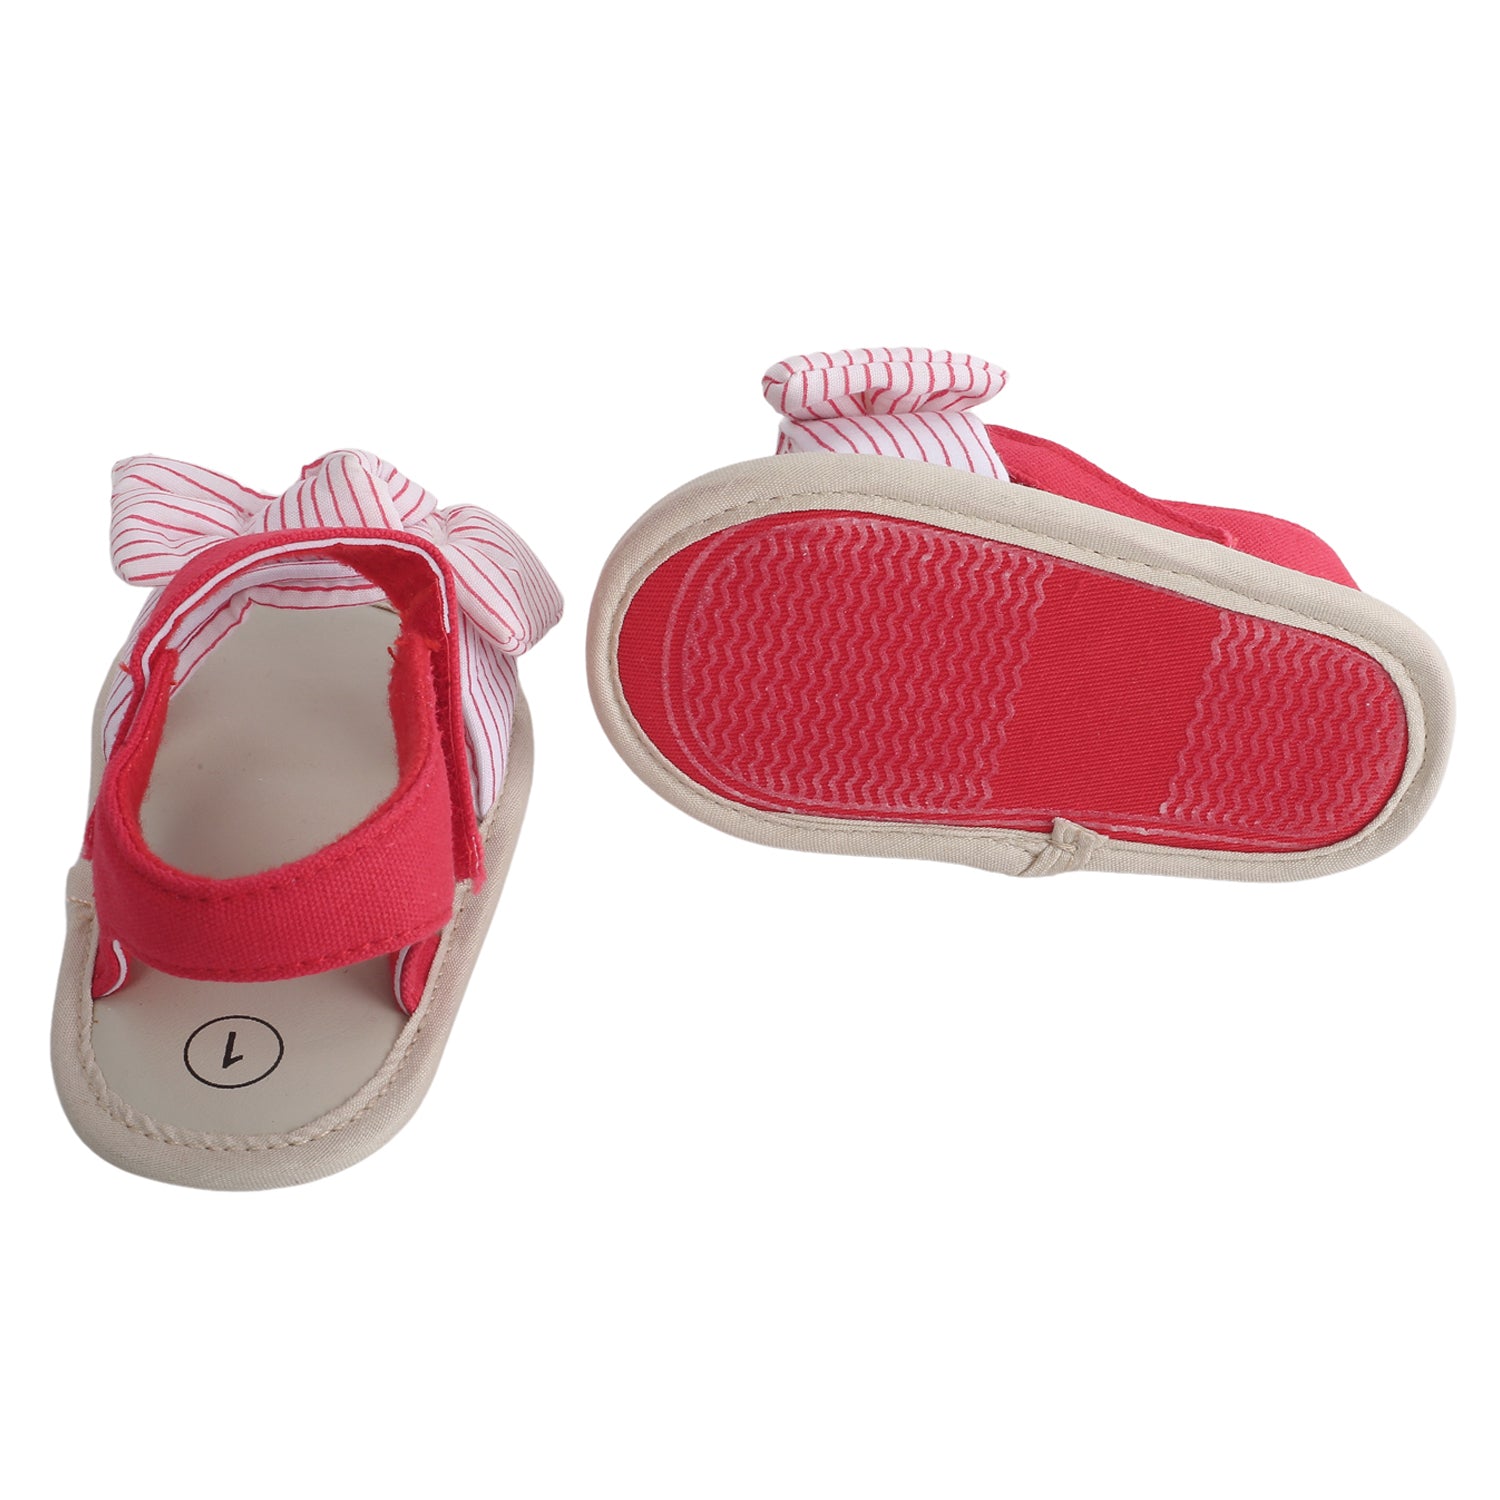 Baby Moo Striped Red Booties - Baby Moo